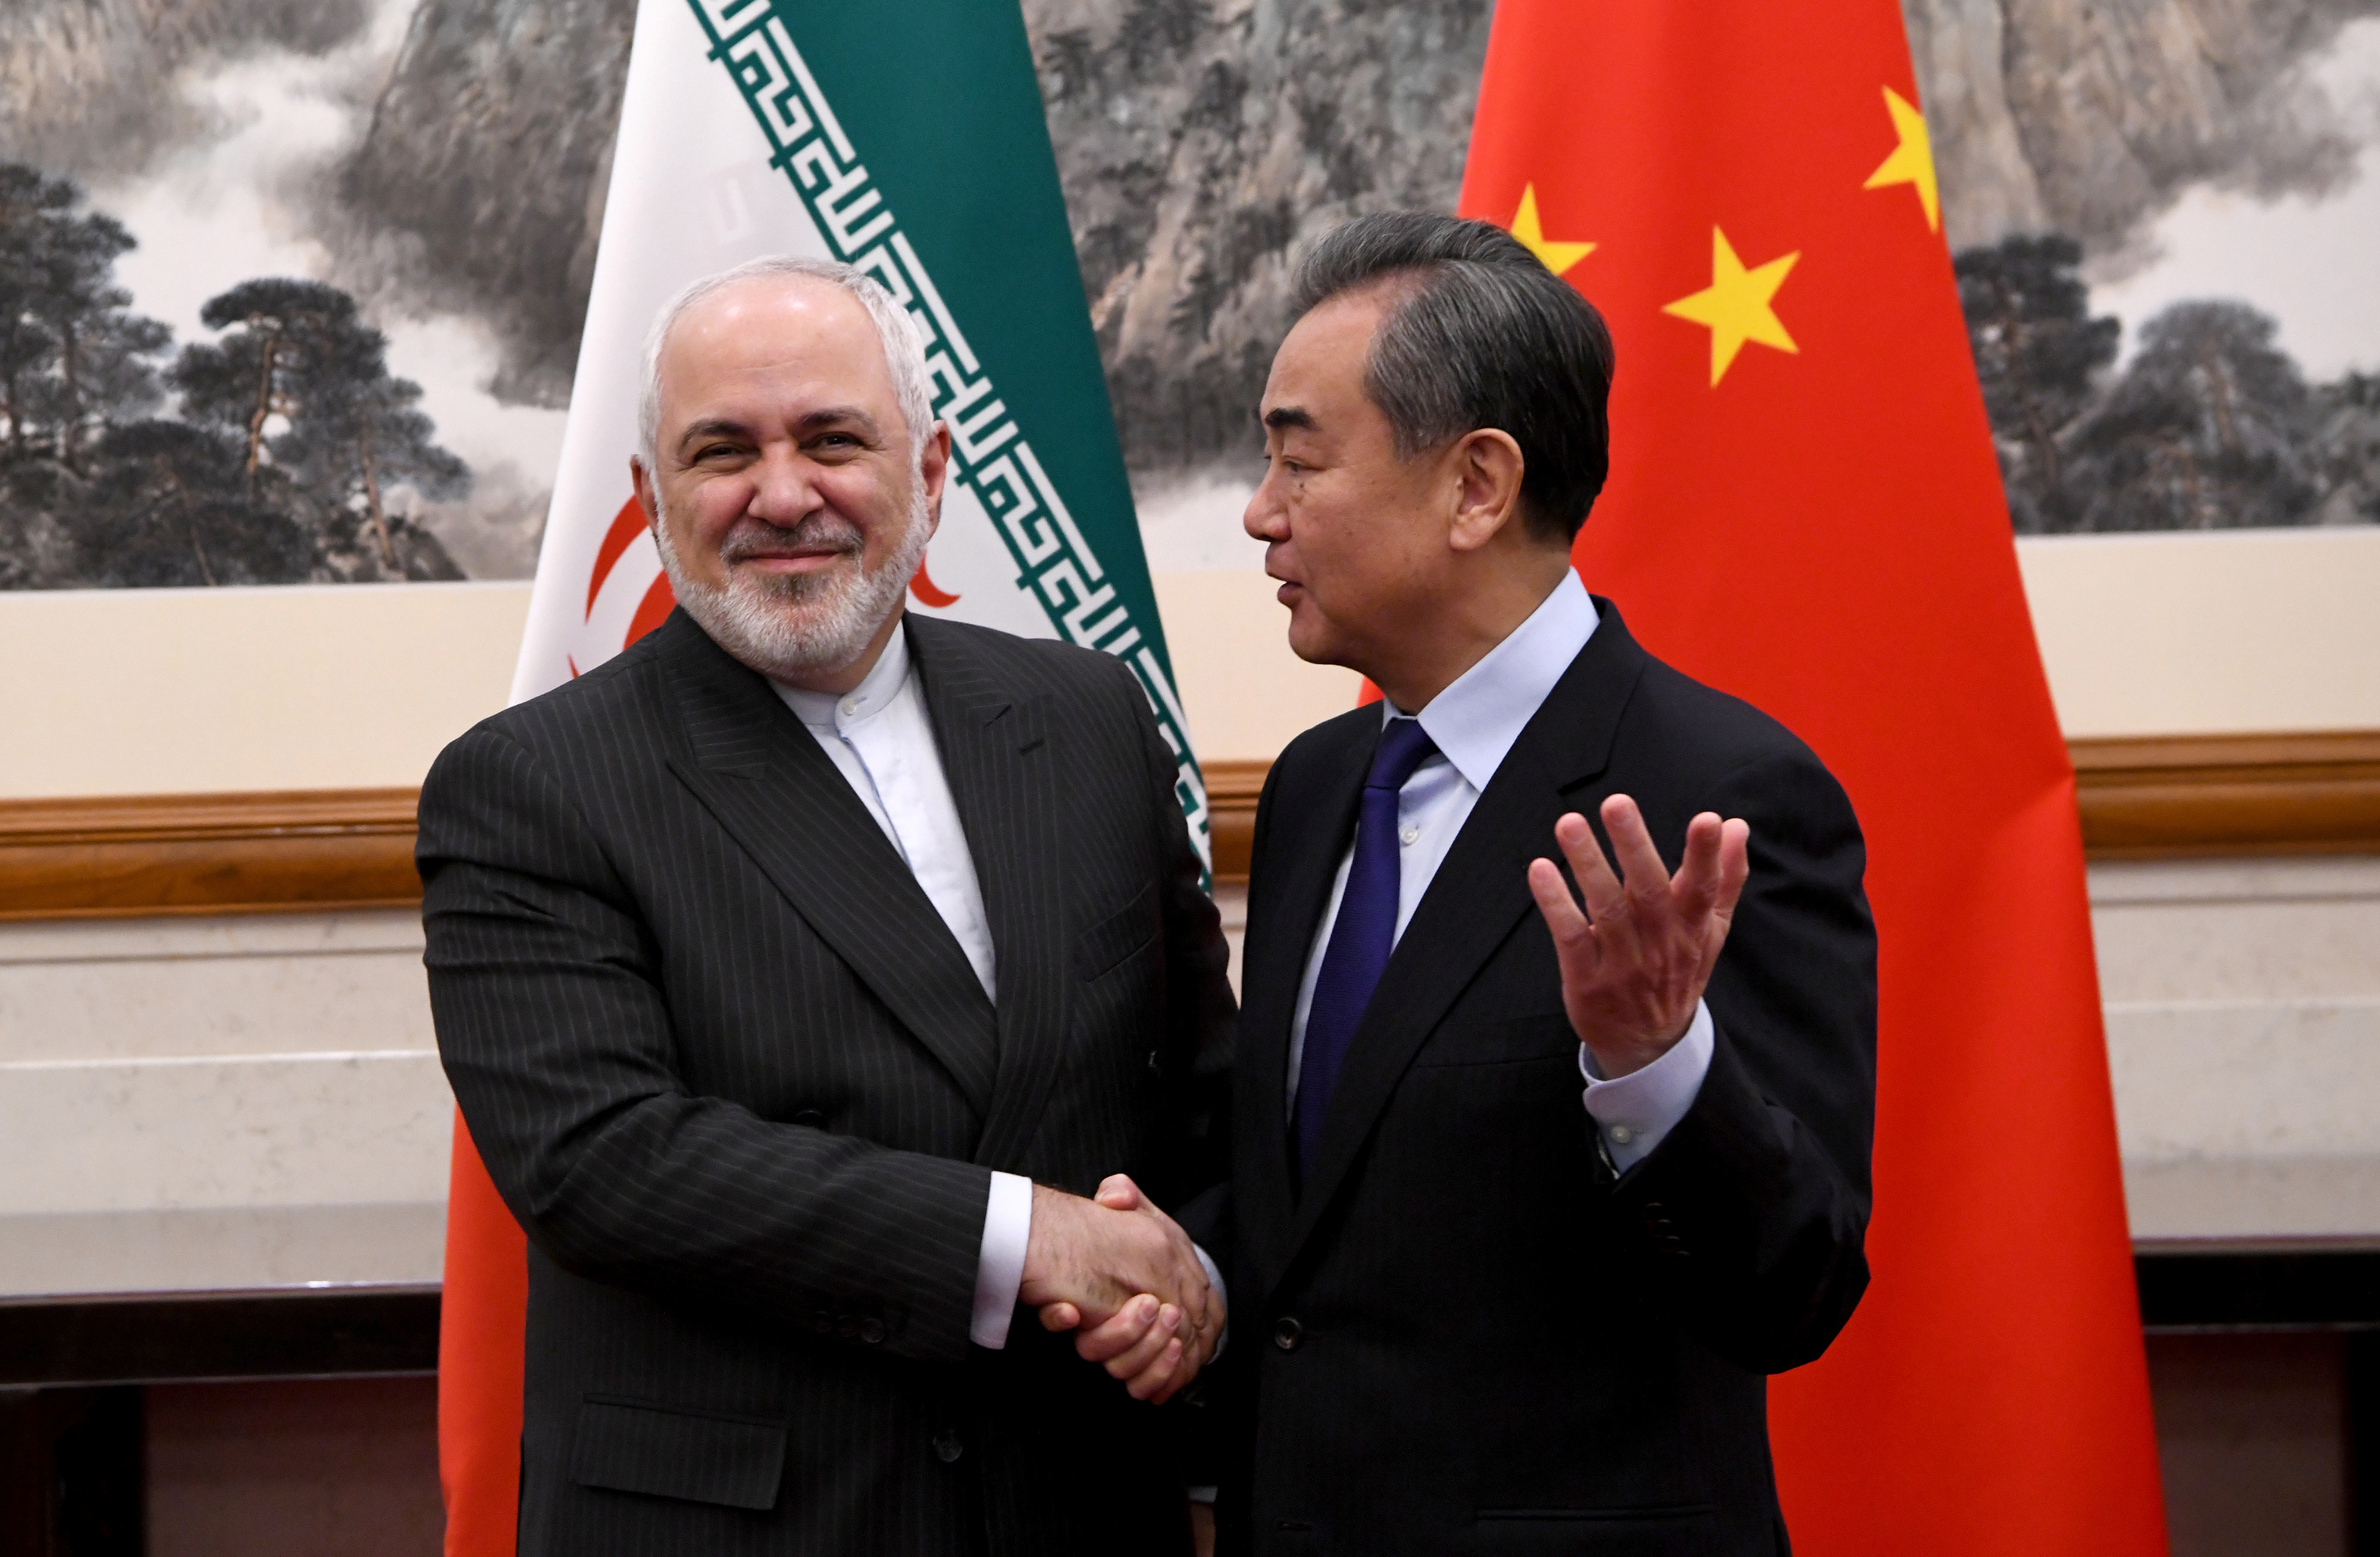 China's Foreign Minister Wang Yi shakes hands with Iran's Foreign Minister Mohammad Javad Zarif during a meeting at the Diaoyutai state guest house in Beijing